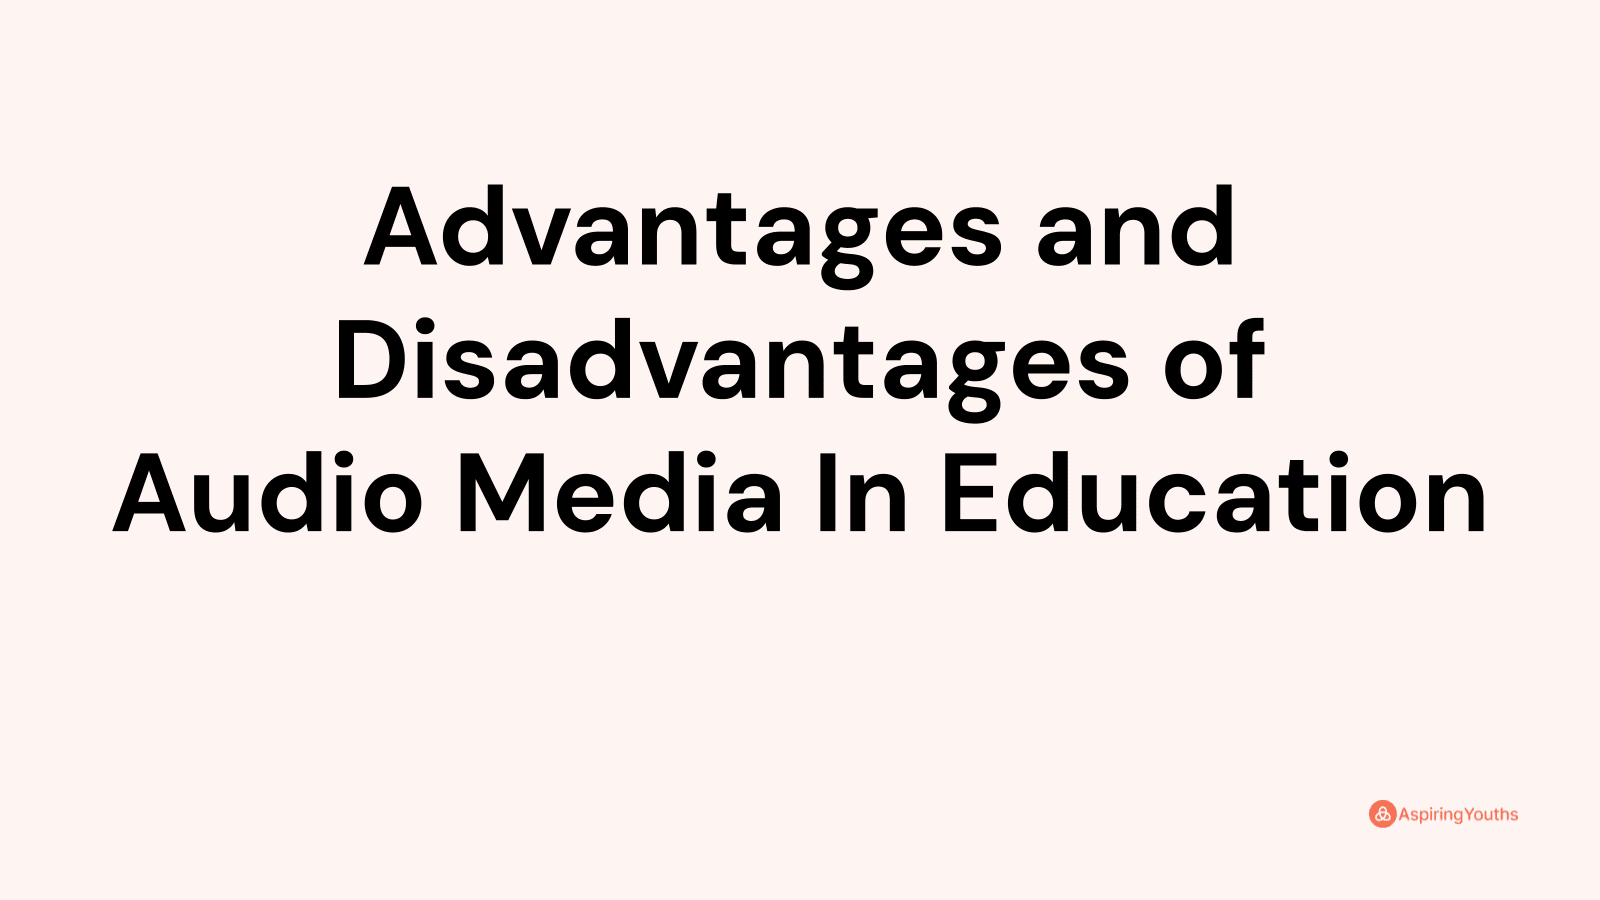 Advantages and disadvantages of Audio Media In Education